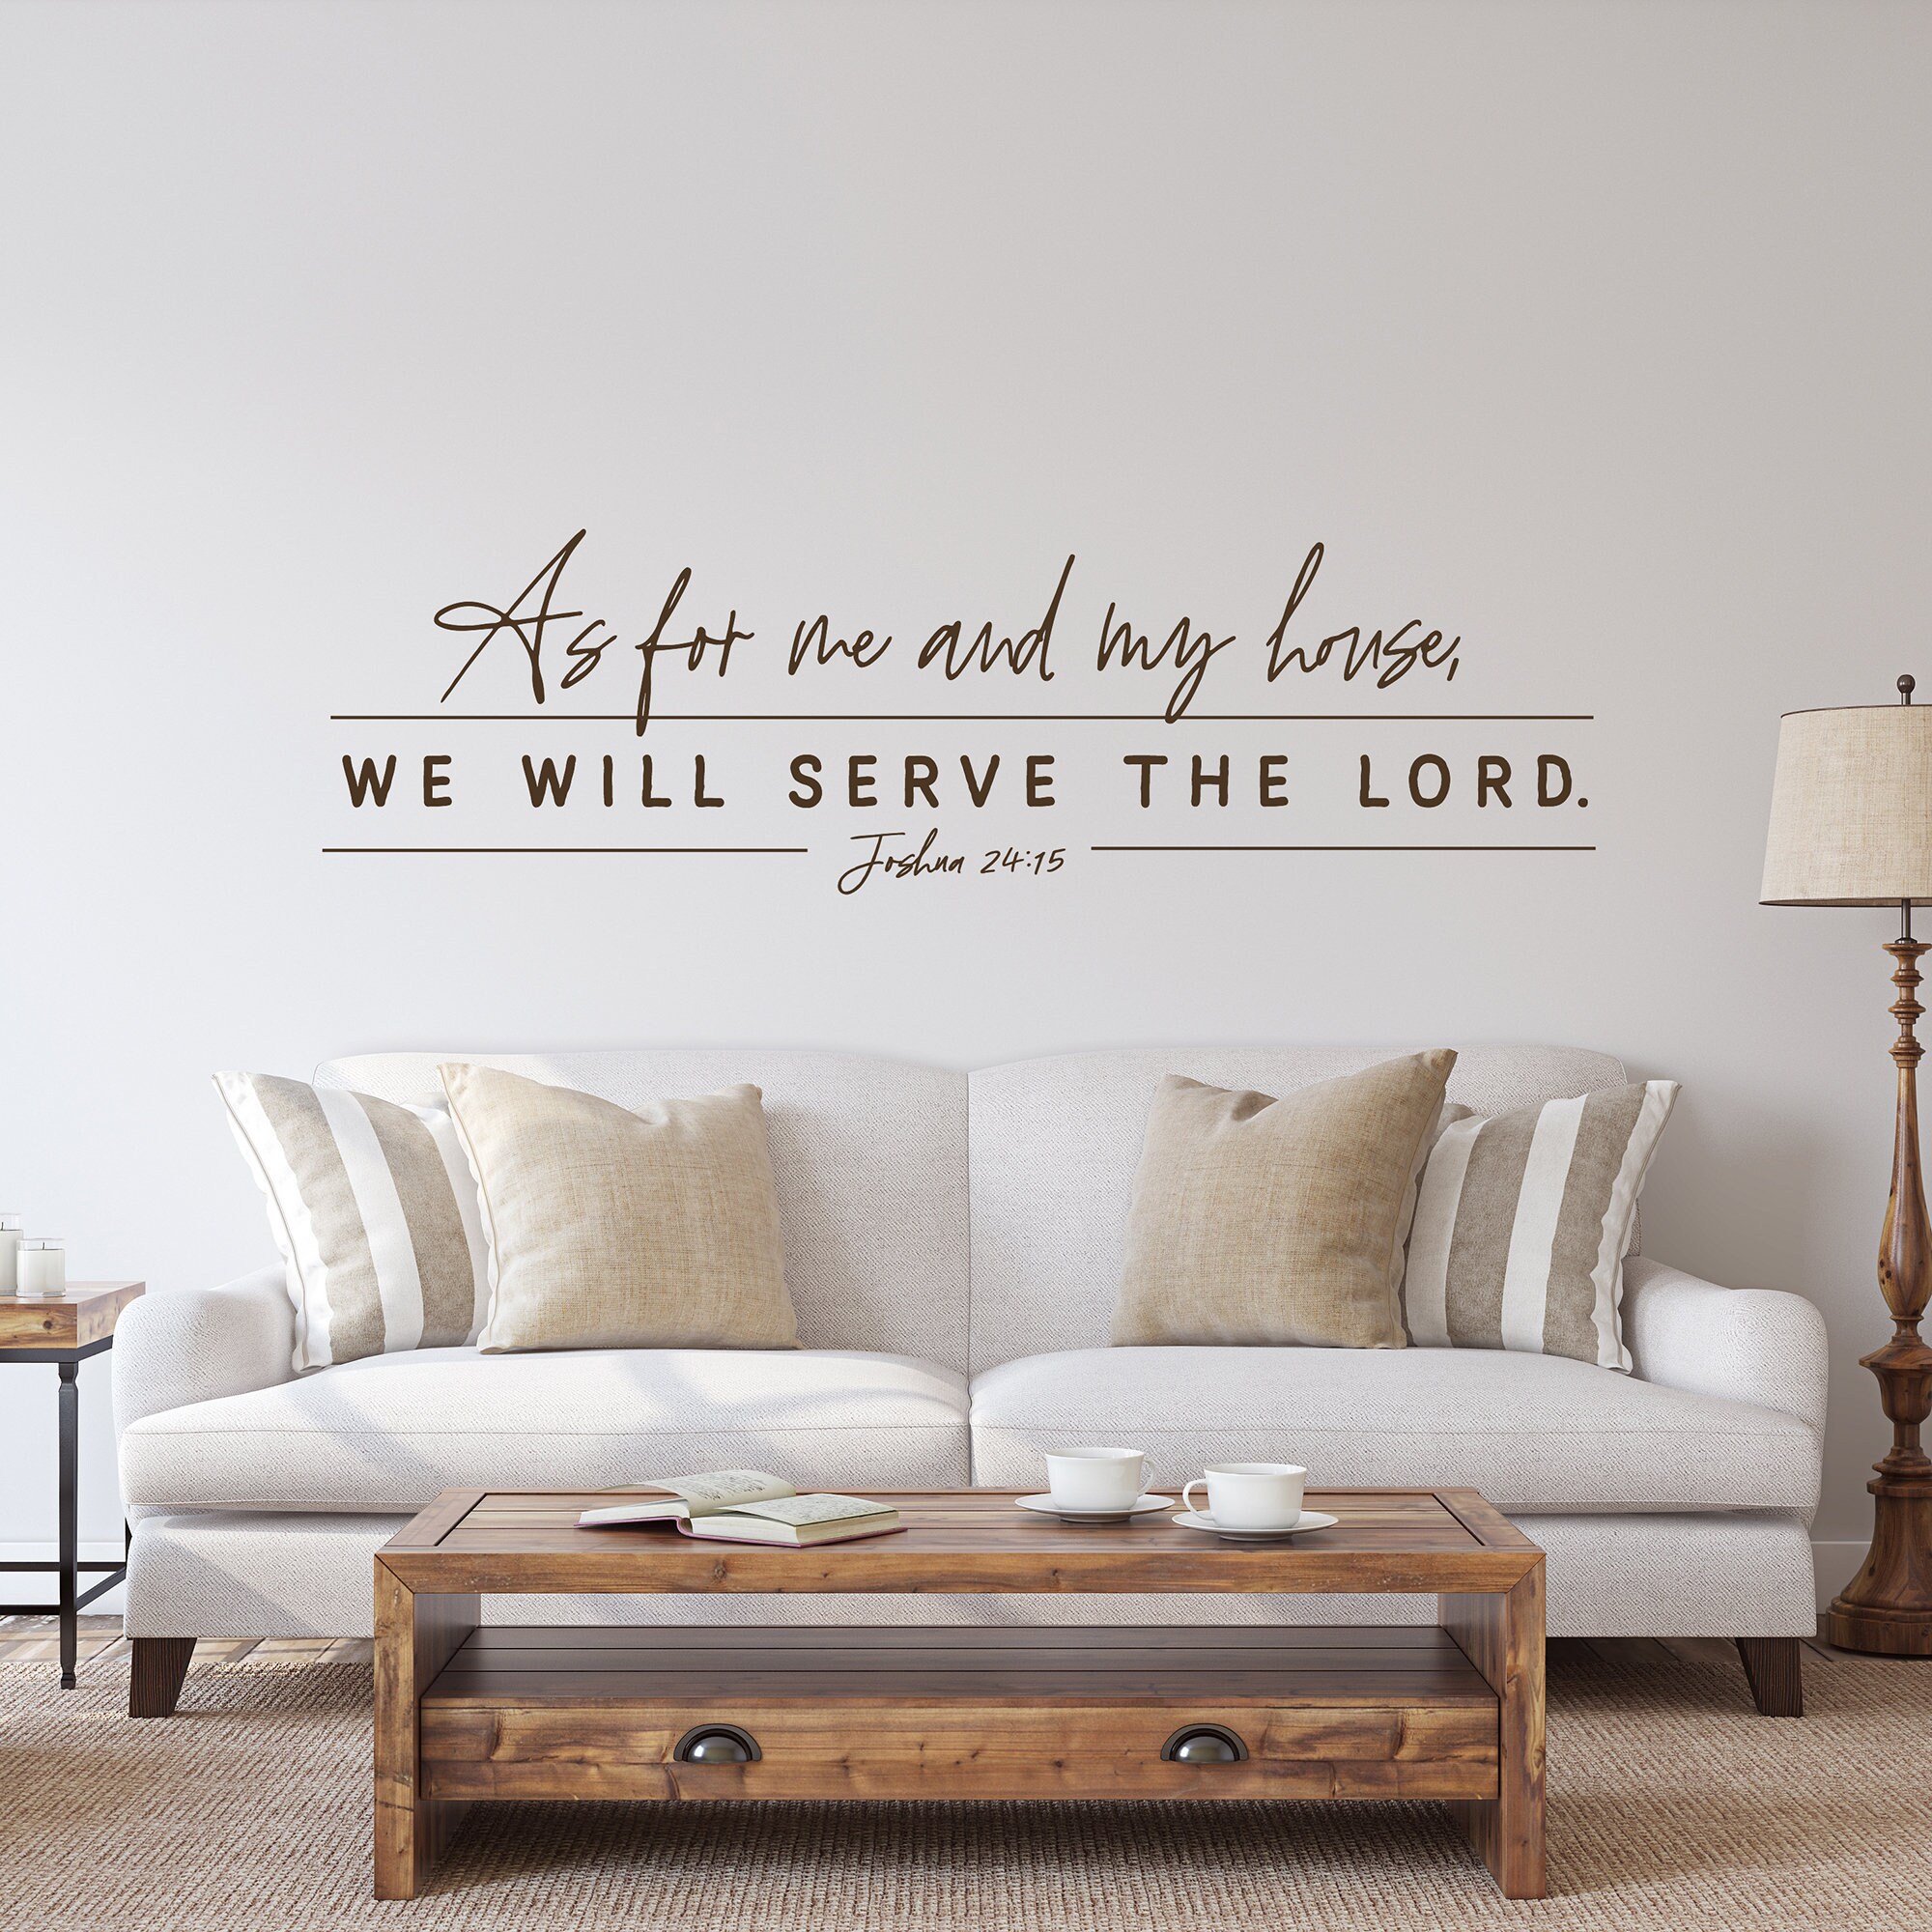 Home is Where My People Are Wall Quotes™ Decal